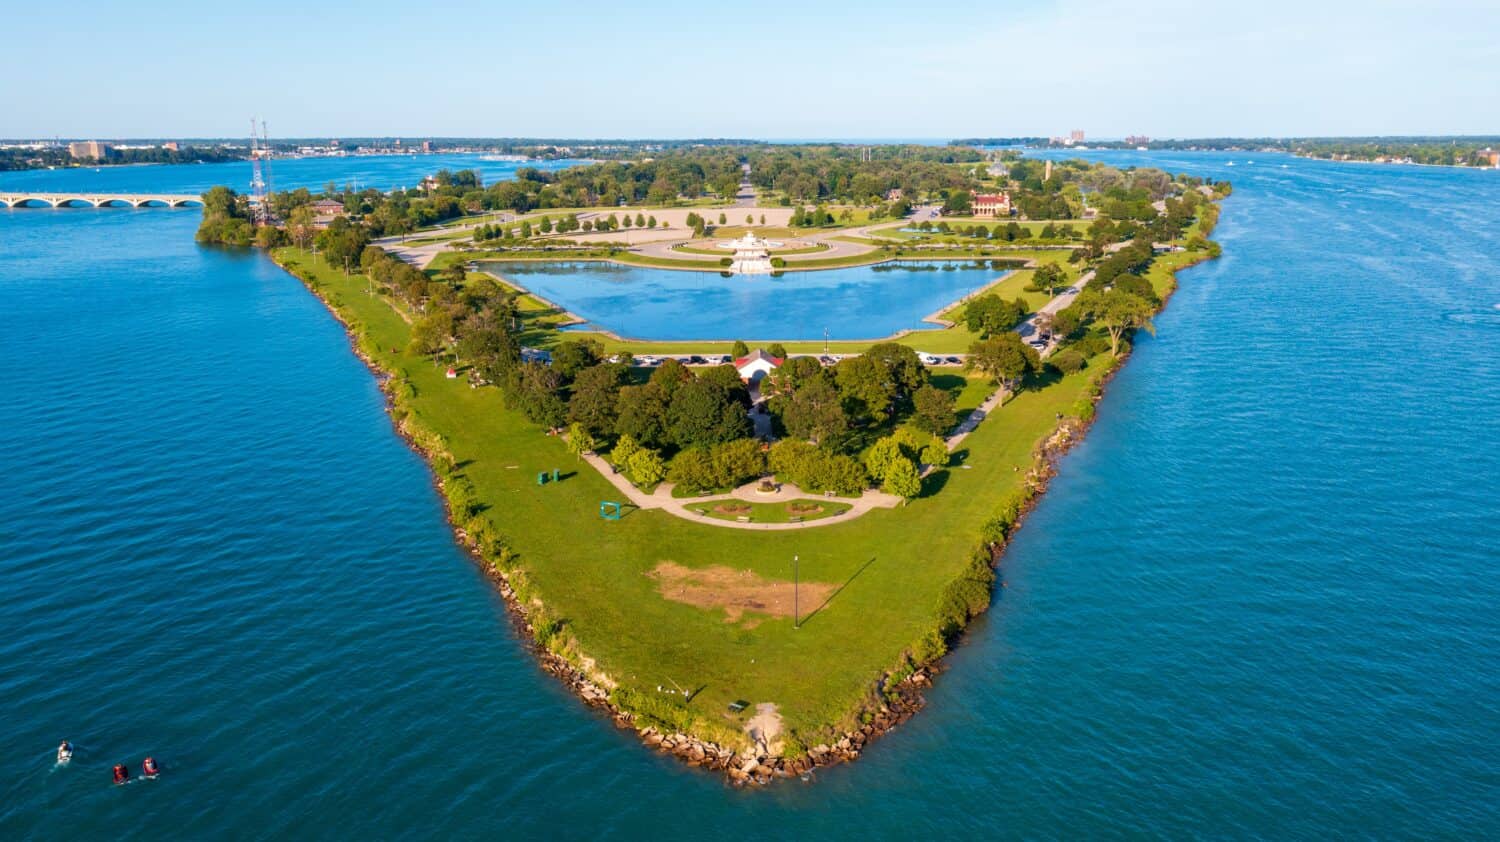 Here's the tip of Belle Isle Park in the Detroit River from an aerial view.